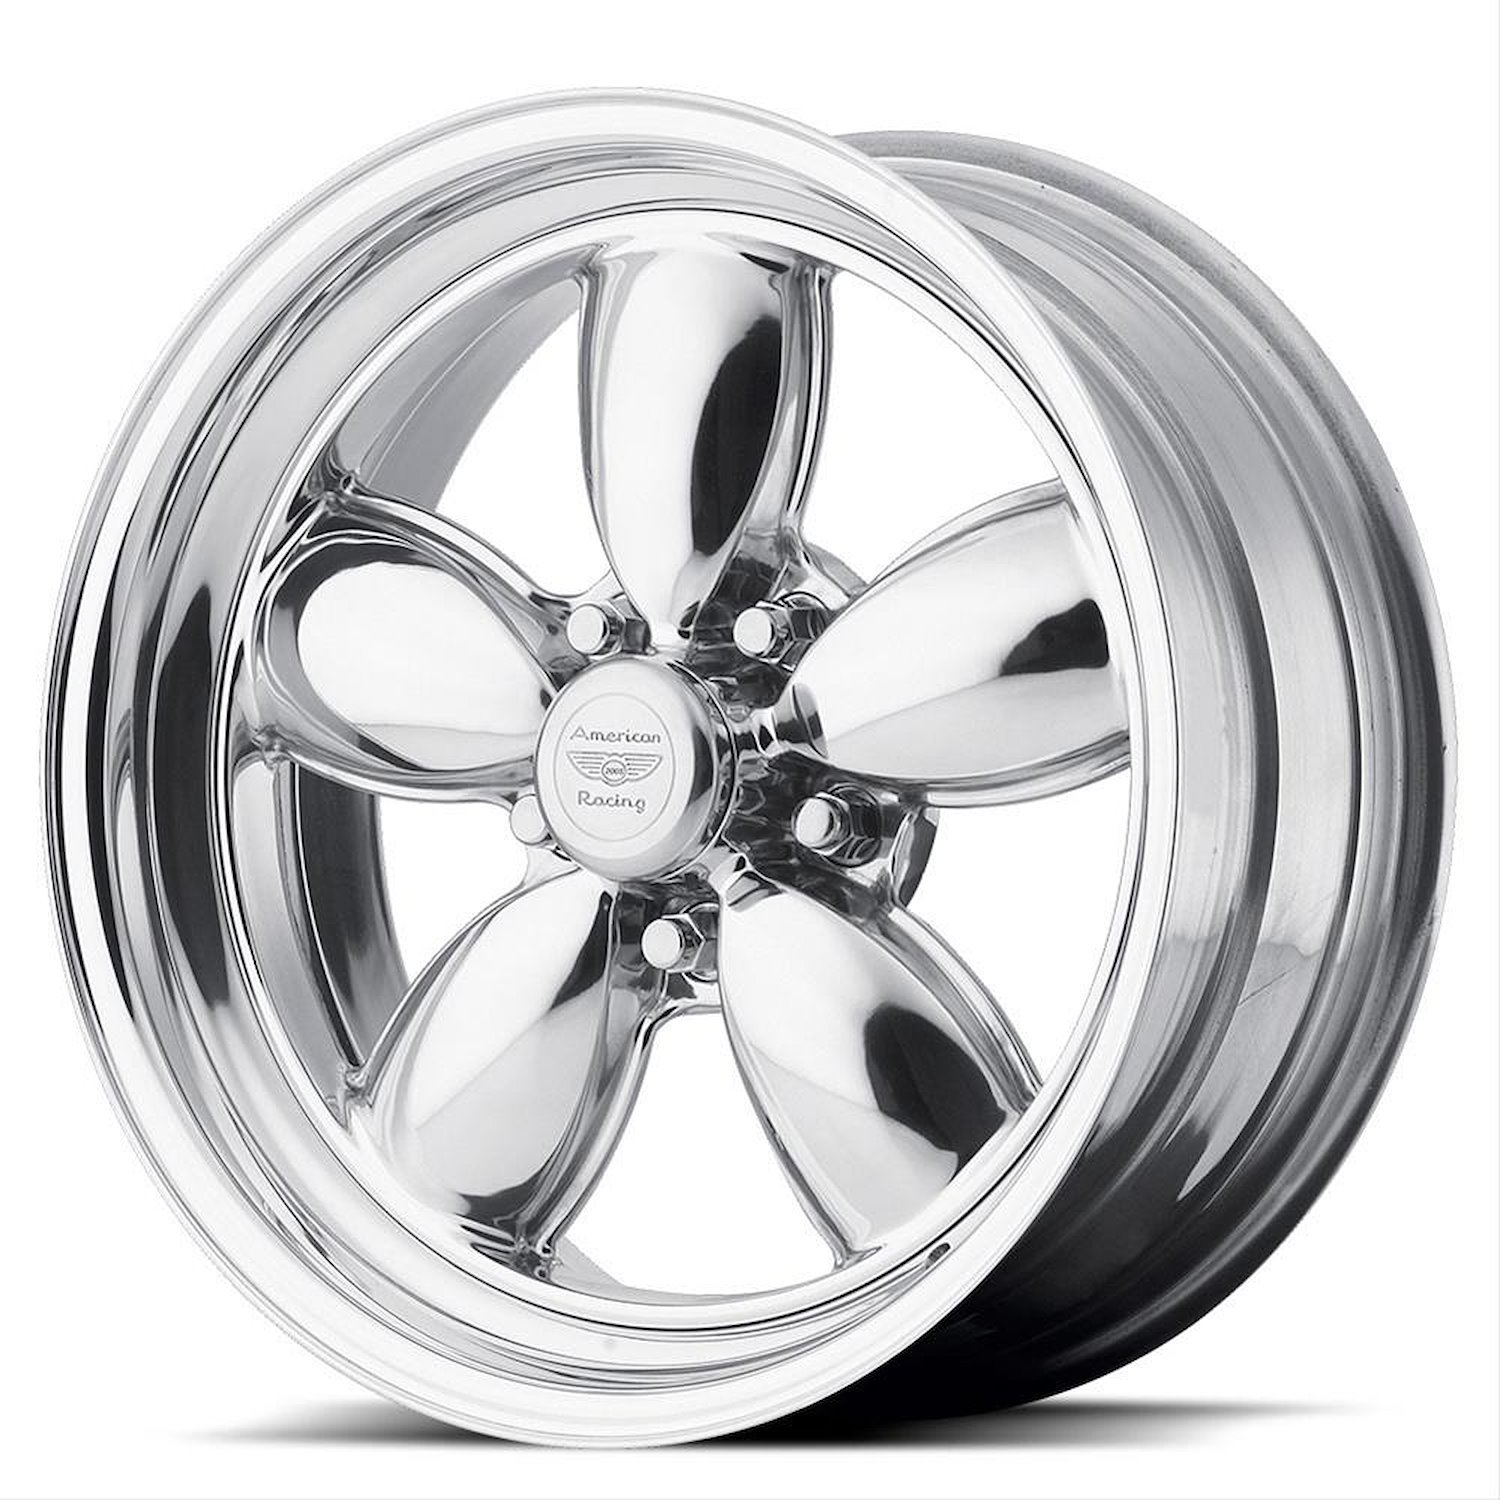 AMERICAN RACING CLASSIC 200S TWO-PIECE POLISHED 15 x 8 5X4.75 -13 3.99